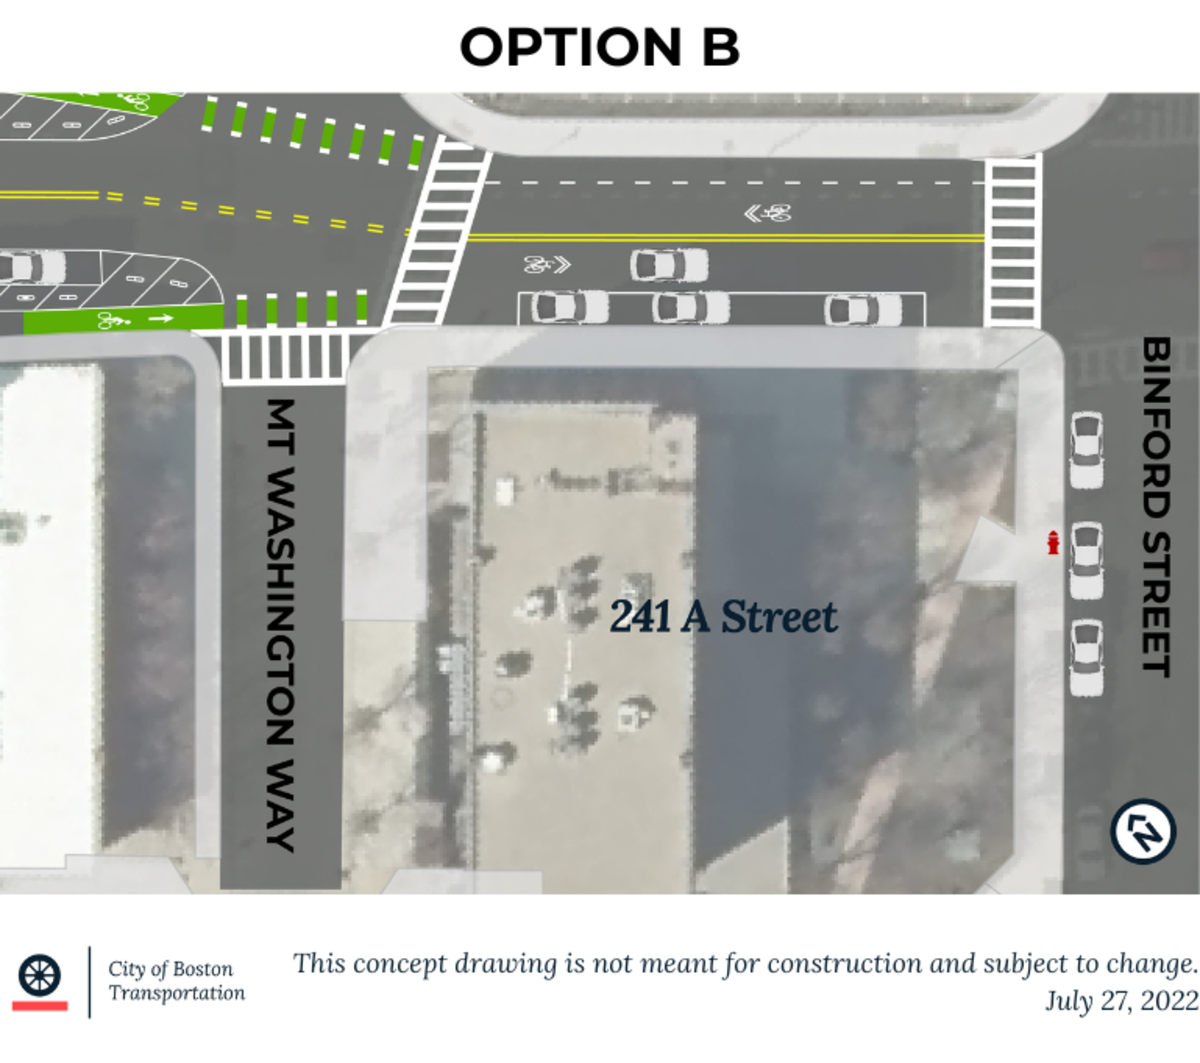 An overhead view of A Street between Mt. Washington Way and Binford Street. This option shows the existing condition with parking in front of 241 A Street.